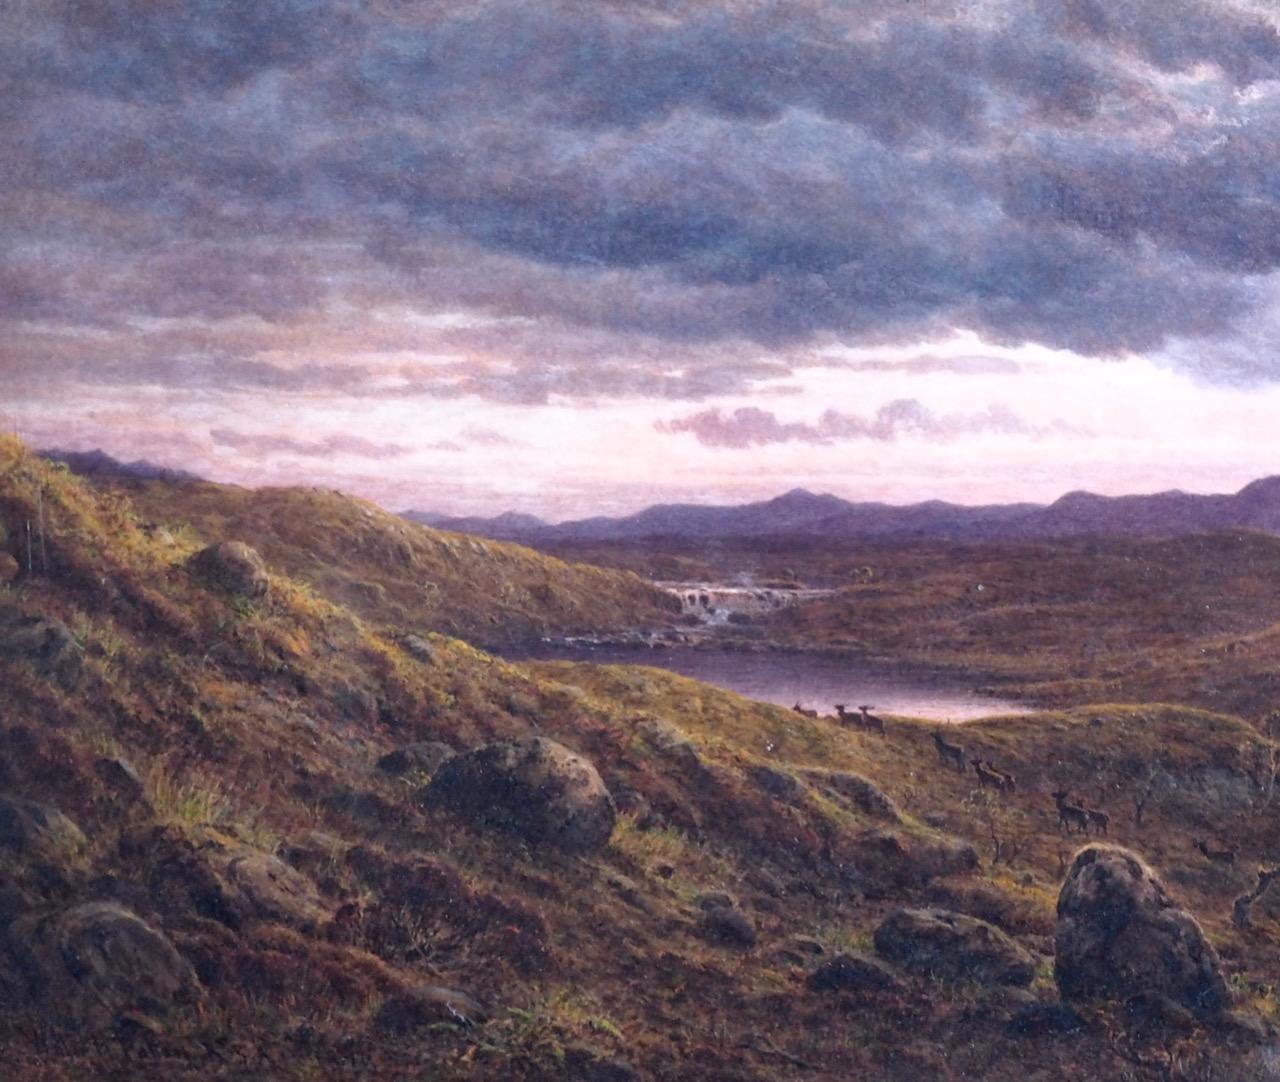 Fine South American landscape painted by Waller H. Paton, signed. 19th century
Measures: With frame:
H. 55 W. 89 cm
H. 21.6 W. 35 in
Without frame:
H. 33 W. 67 cm
H. 12.9 W. 26.3 in.